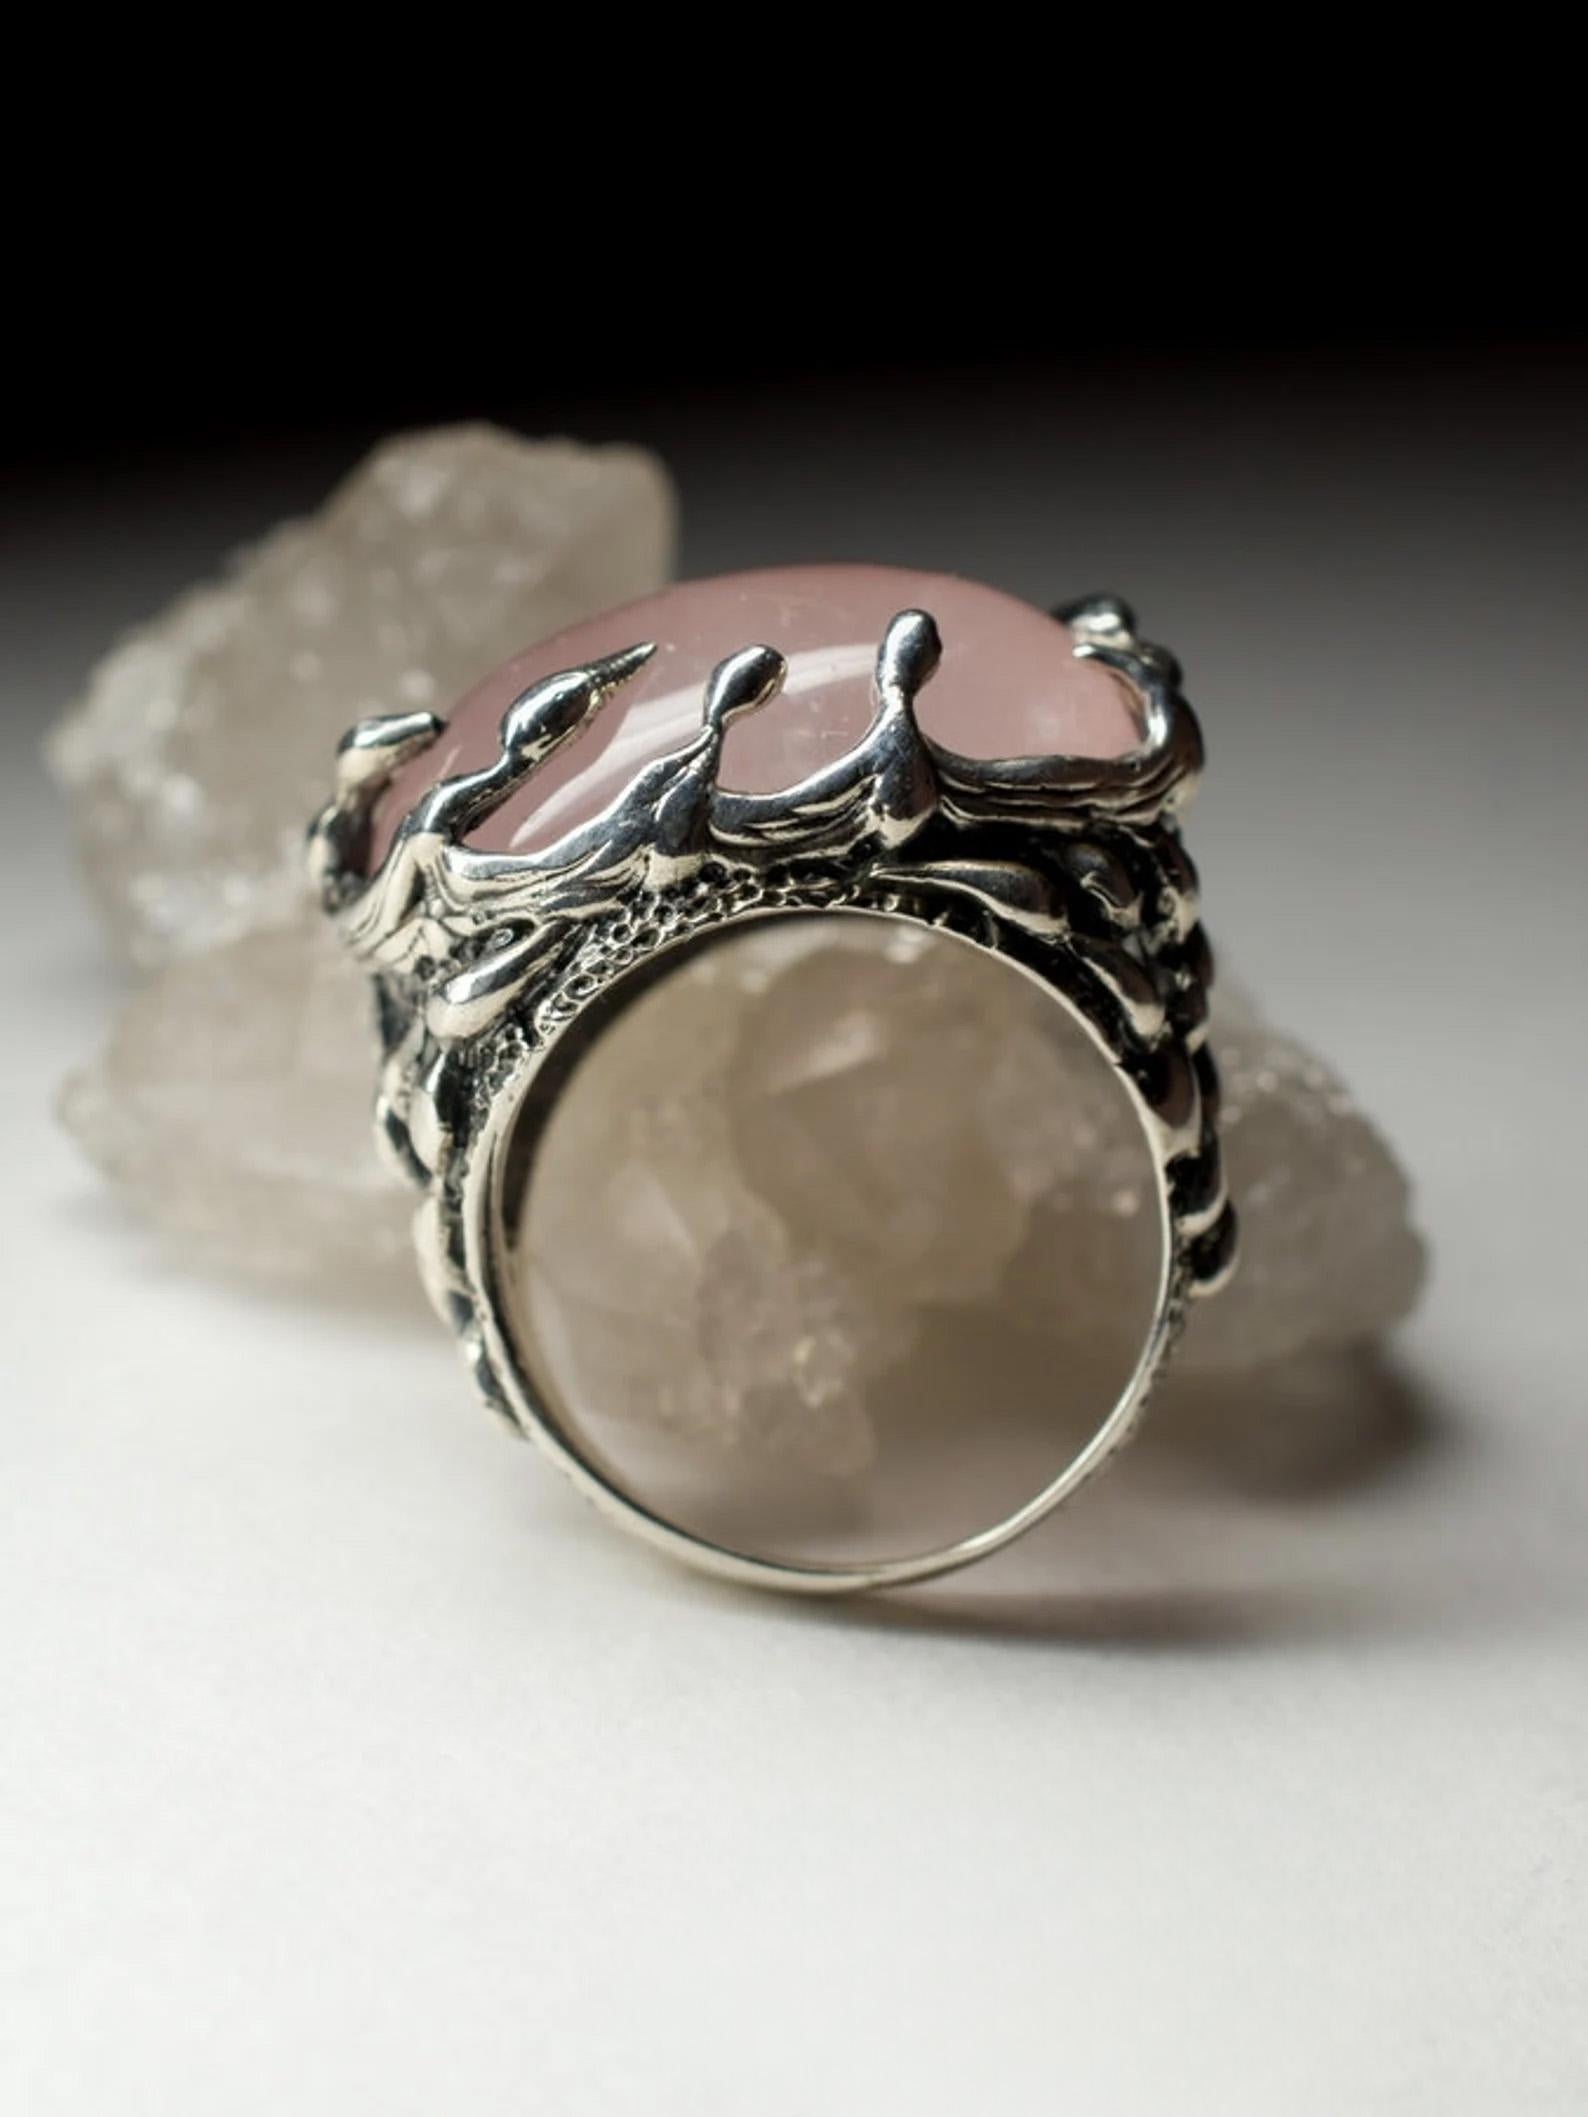 Cabochon Pink Quartz Silver Ring Queen Lucy Style Clear Pale Rose Brazilian Gemstone For Sale